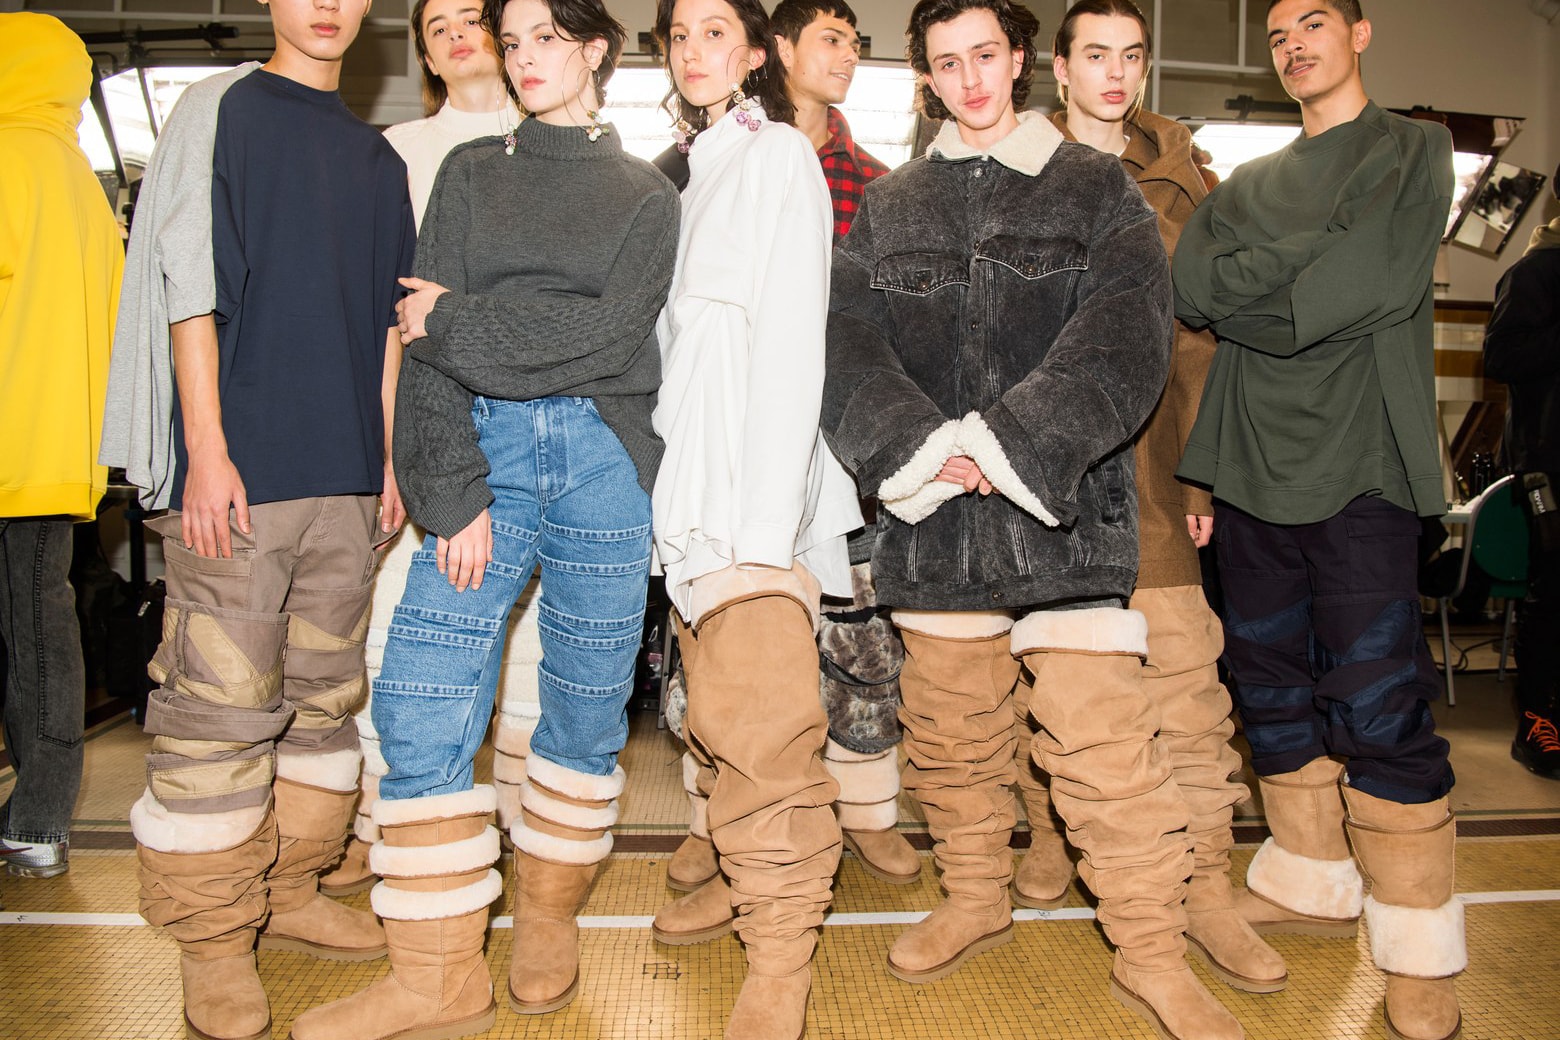 Y/Project Crotch-High Thigh UGG Boots Paris Fashion Week Men's 2018 Ugly Shoes Trend Runway Show